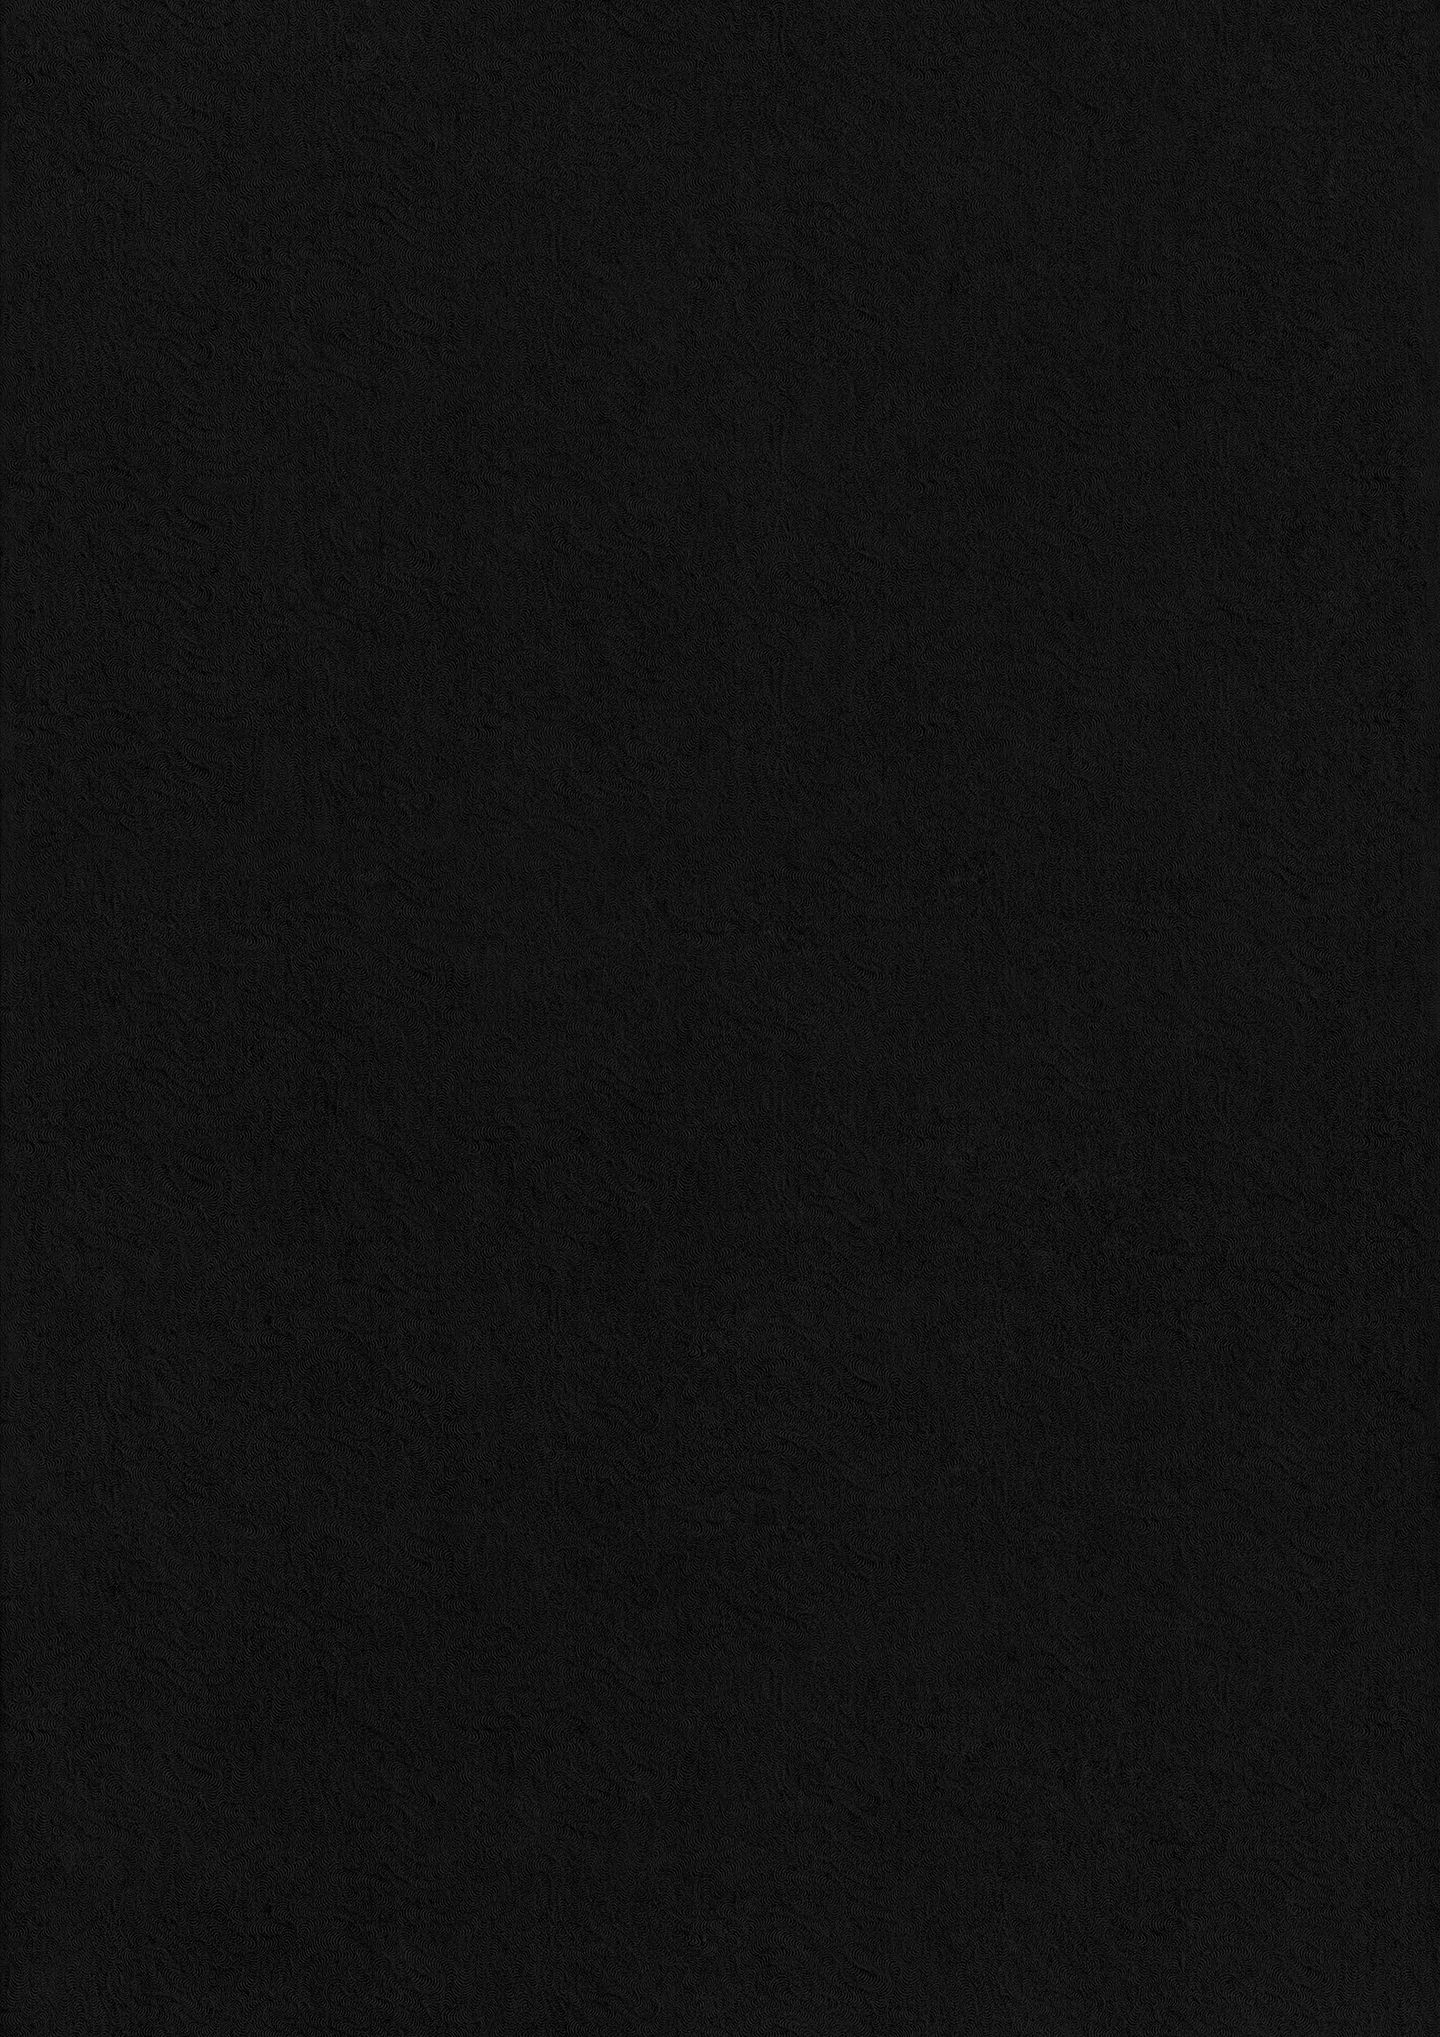 Black Texture Background HD Free Download